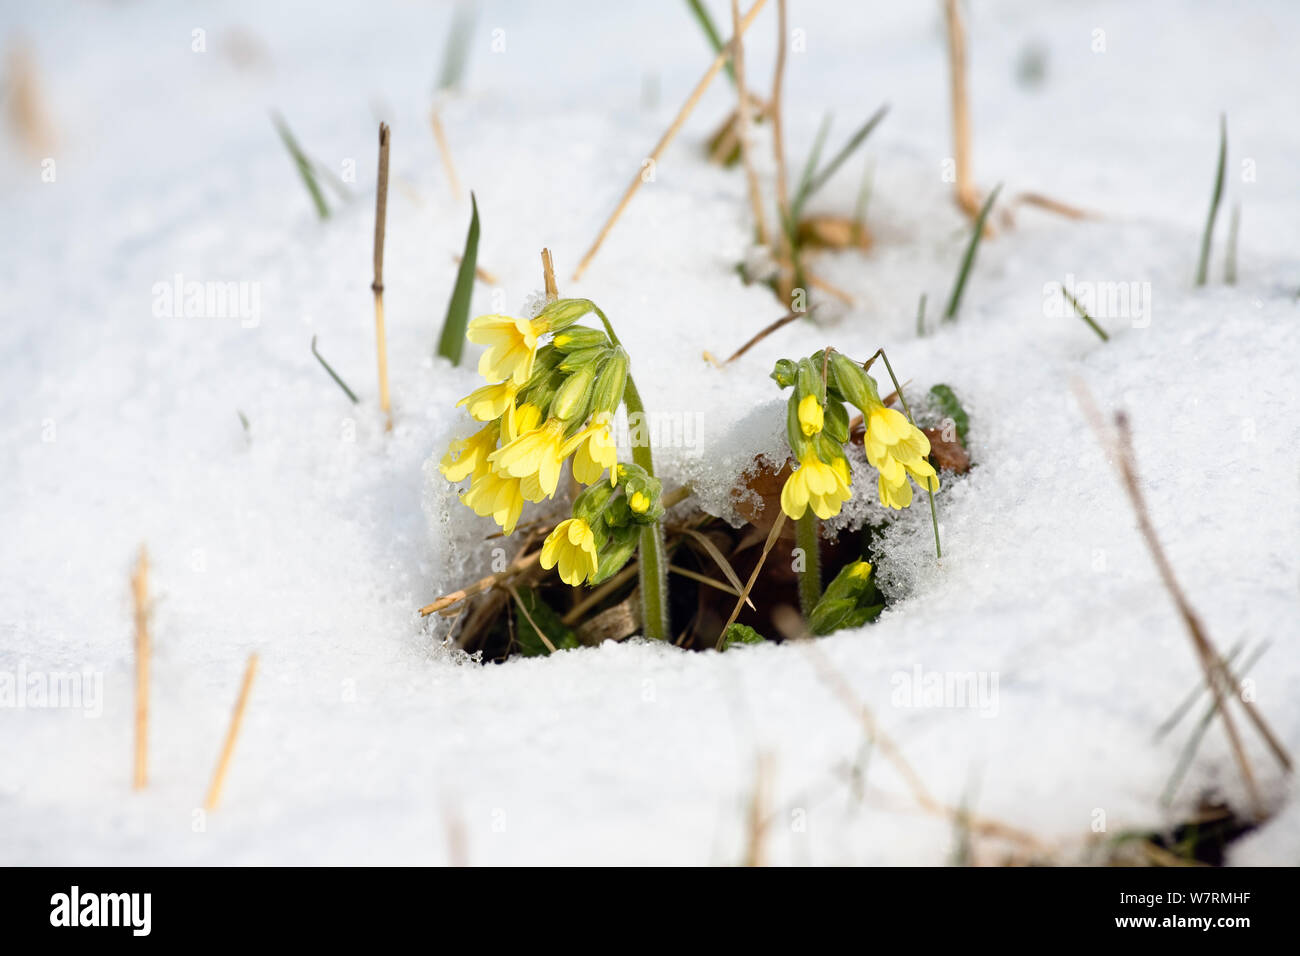 Oxlips (Primula elatior) in flower in the snow,Germany Stock Photo